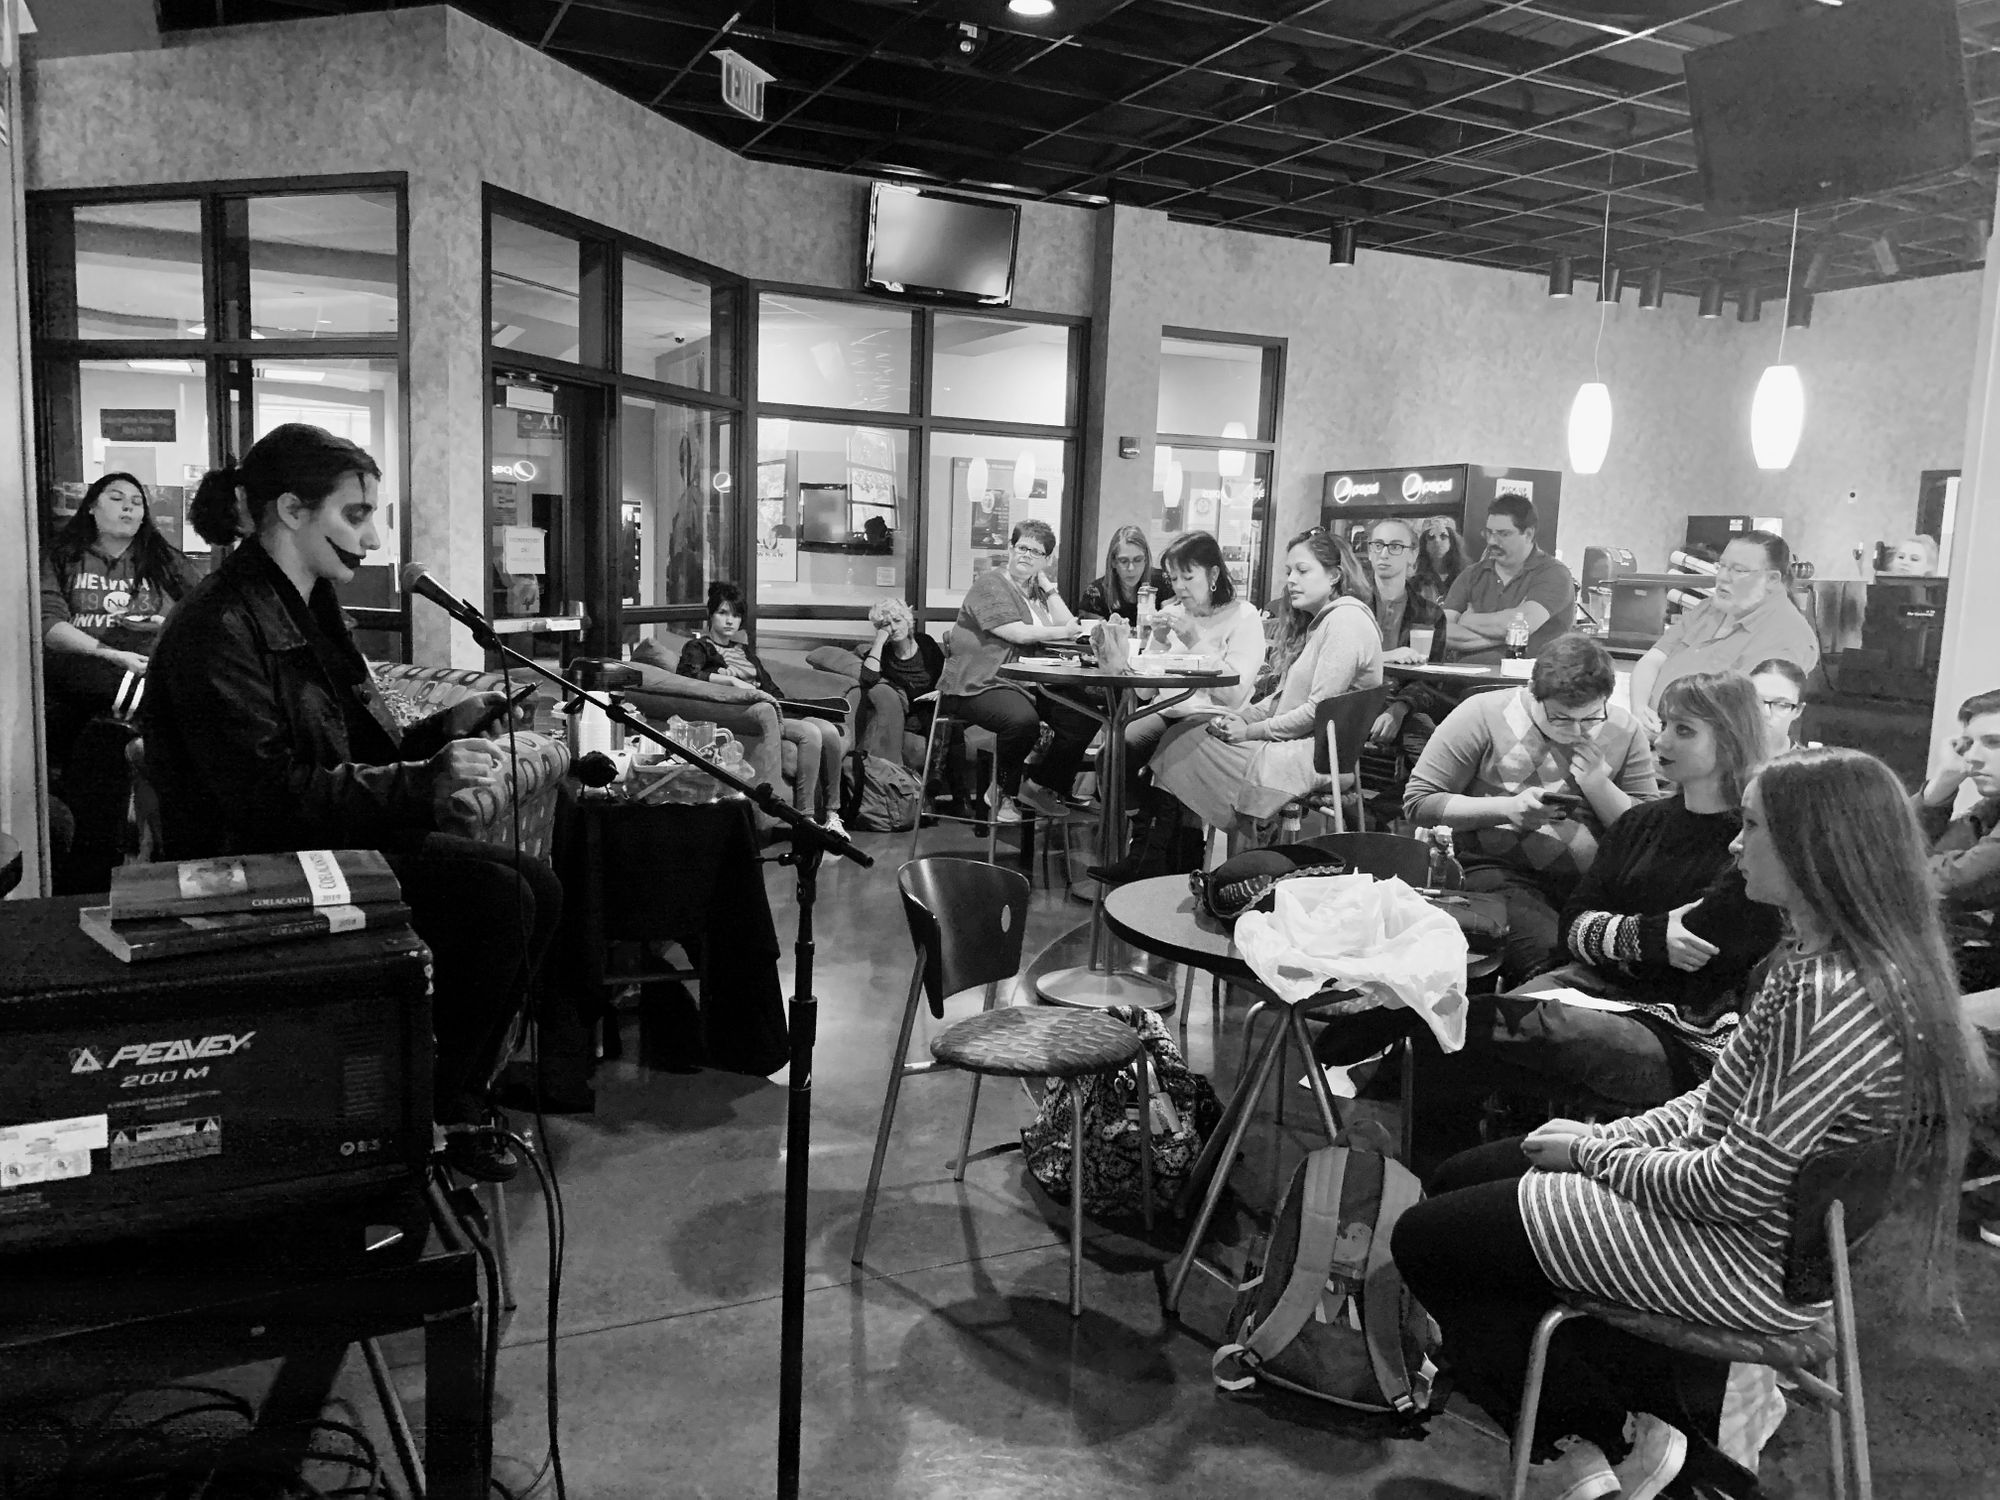 Open Mic offers space to share all forms of art